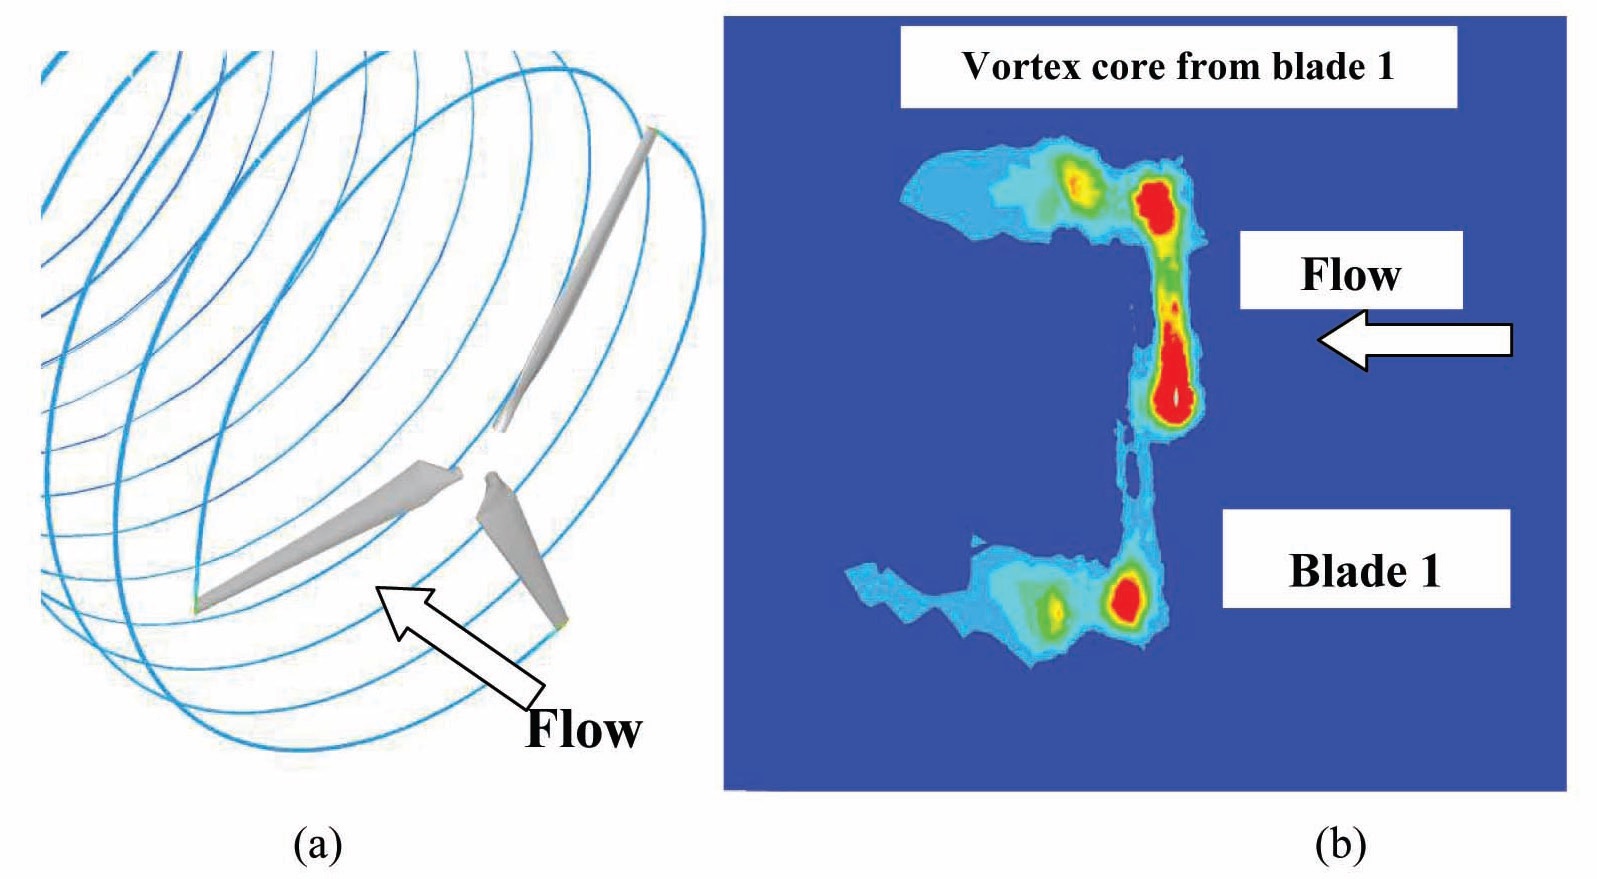 (a) Tip vortices convected downstream. (b) Vorticity contours on a longitudinal plane showing the core of the wingtip vortices being con vected downstream and dissipated. Side view along blade centerline. Blade pitch angle = 6°.